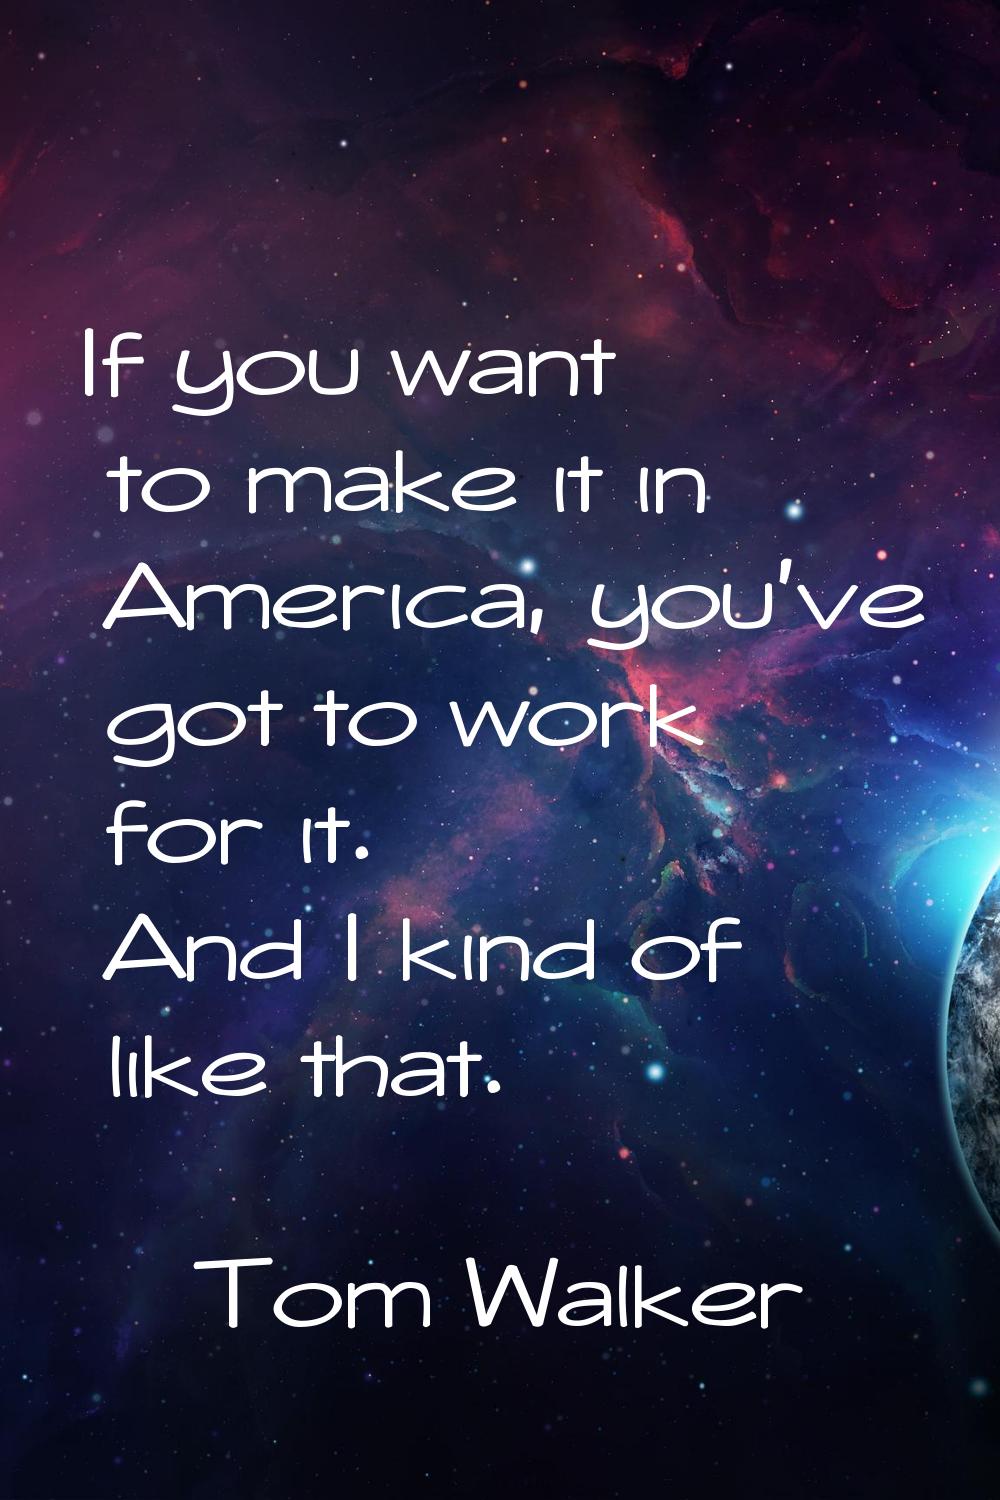 If you want to make it in America, you've got to work for it. And I kind of like that.